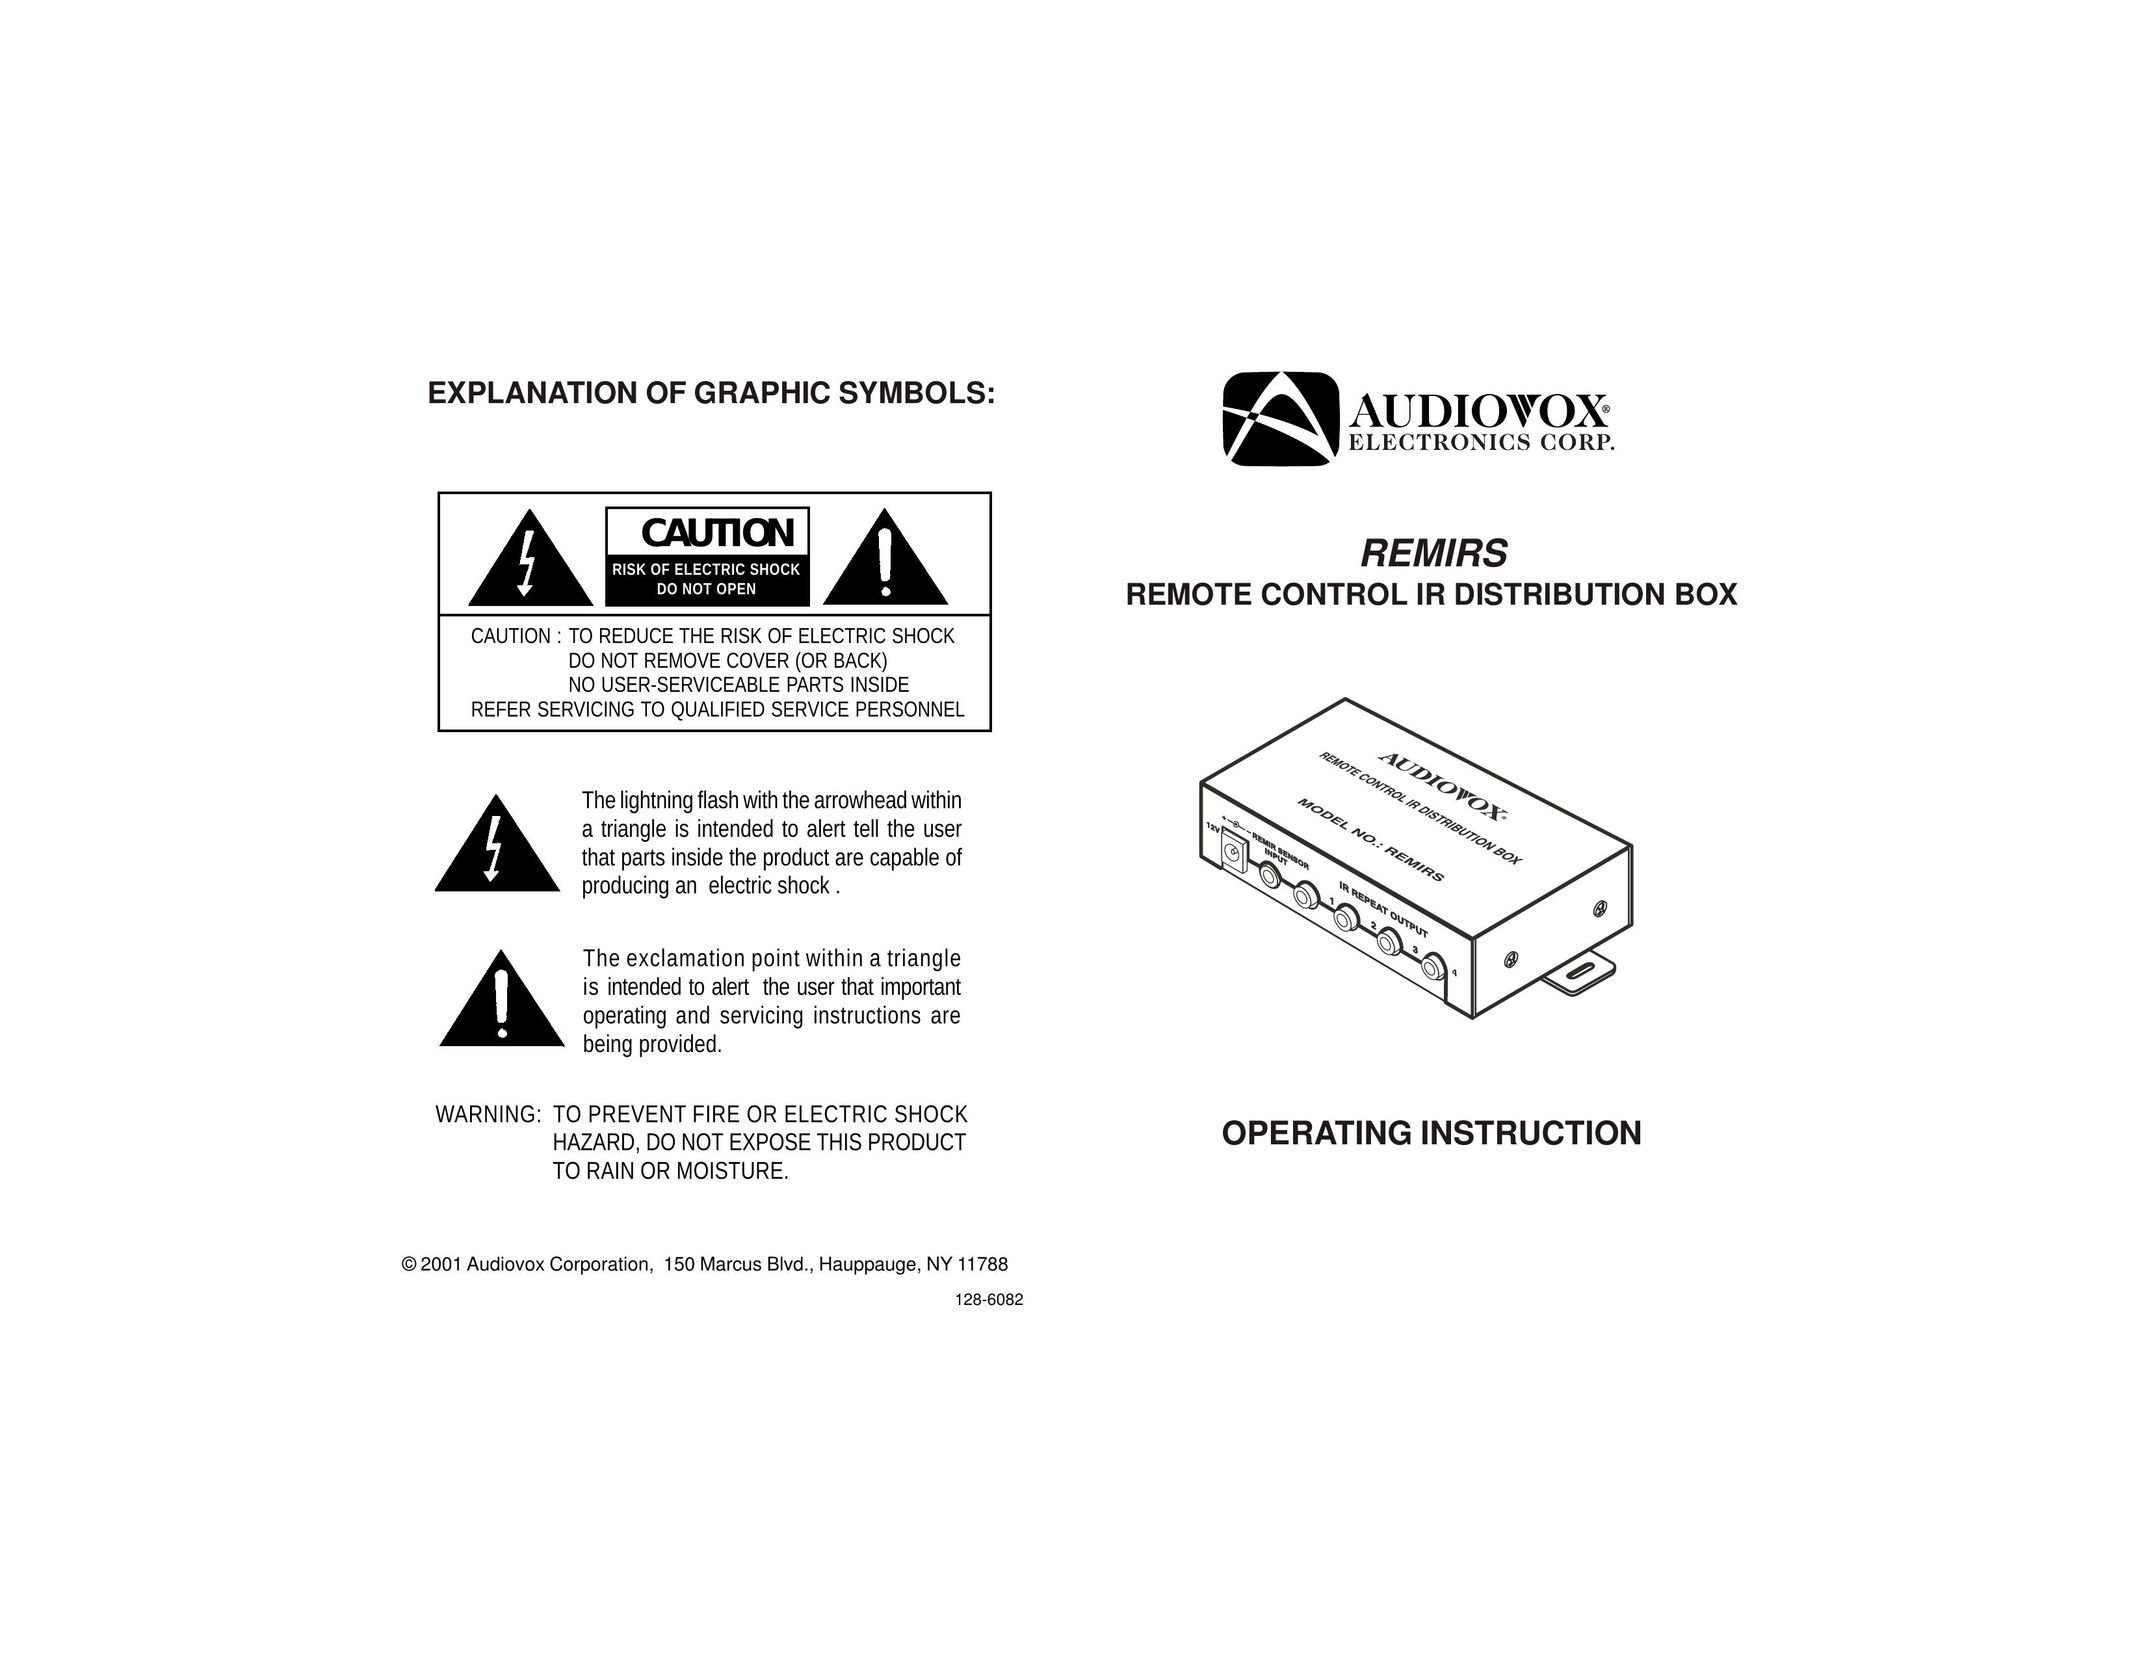 Audiovox REMIRS Switch User Manual